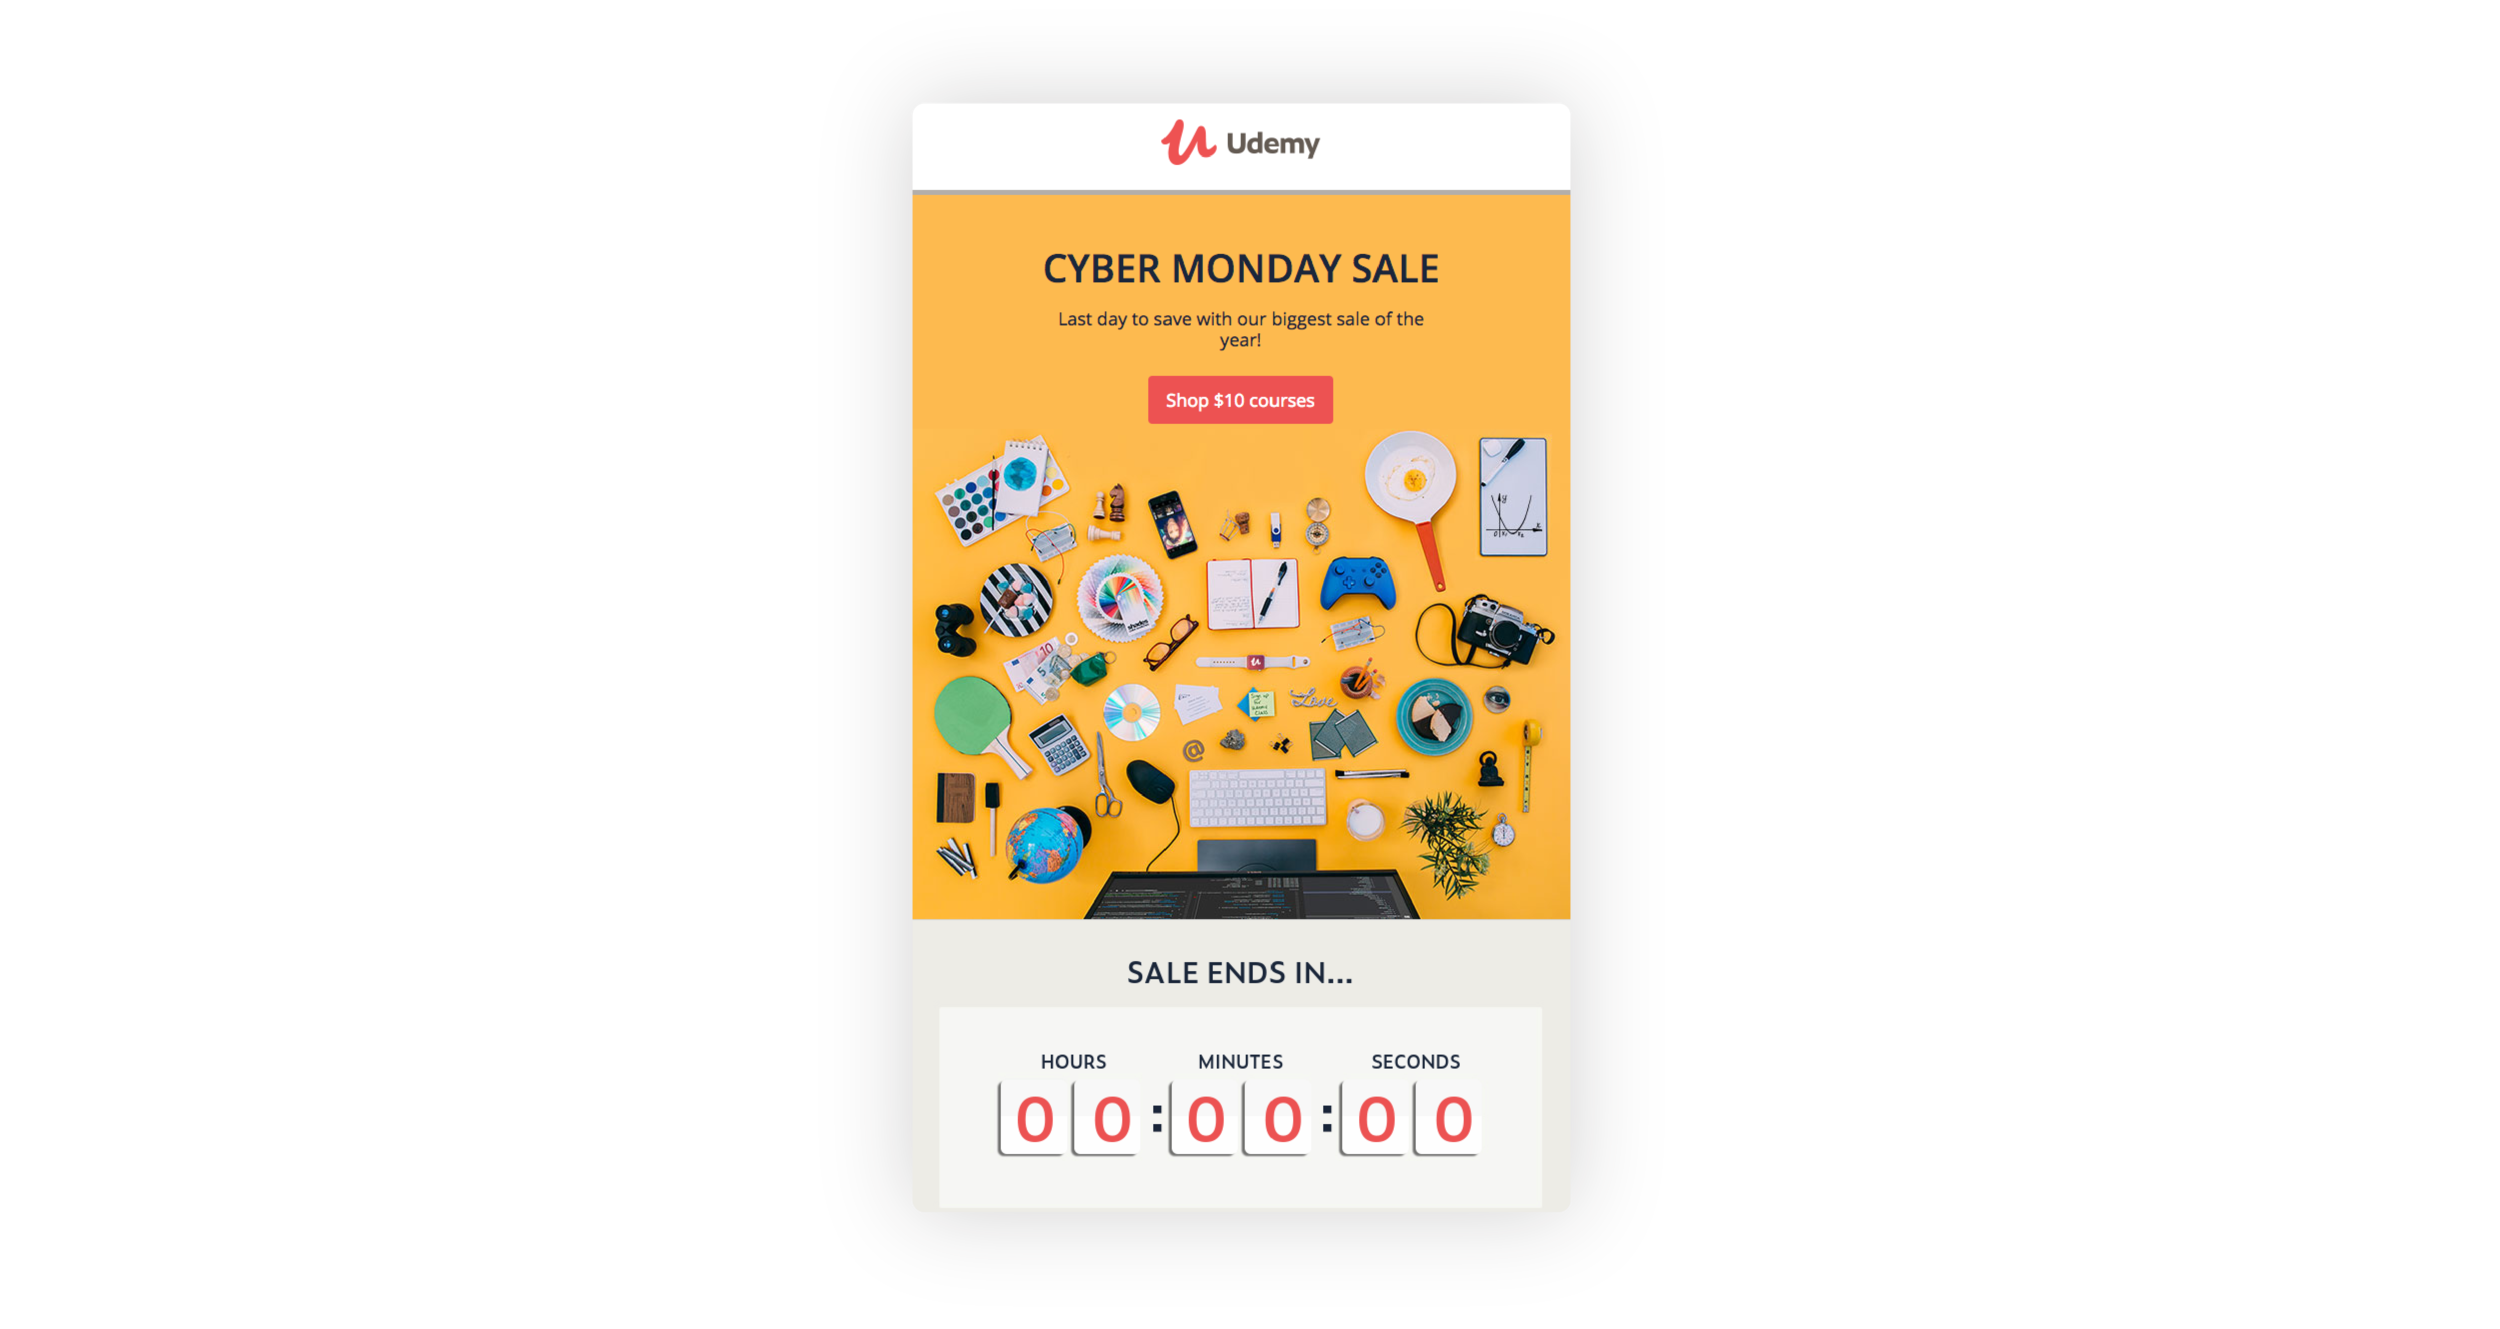 Udemy's Cyber Monday countdown timer